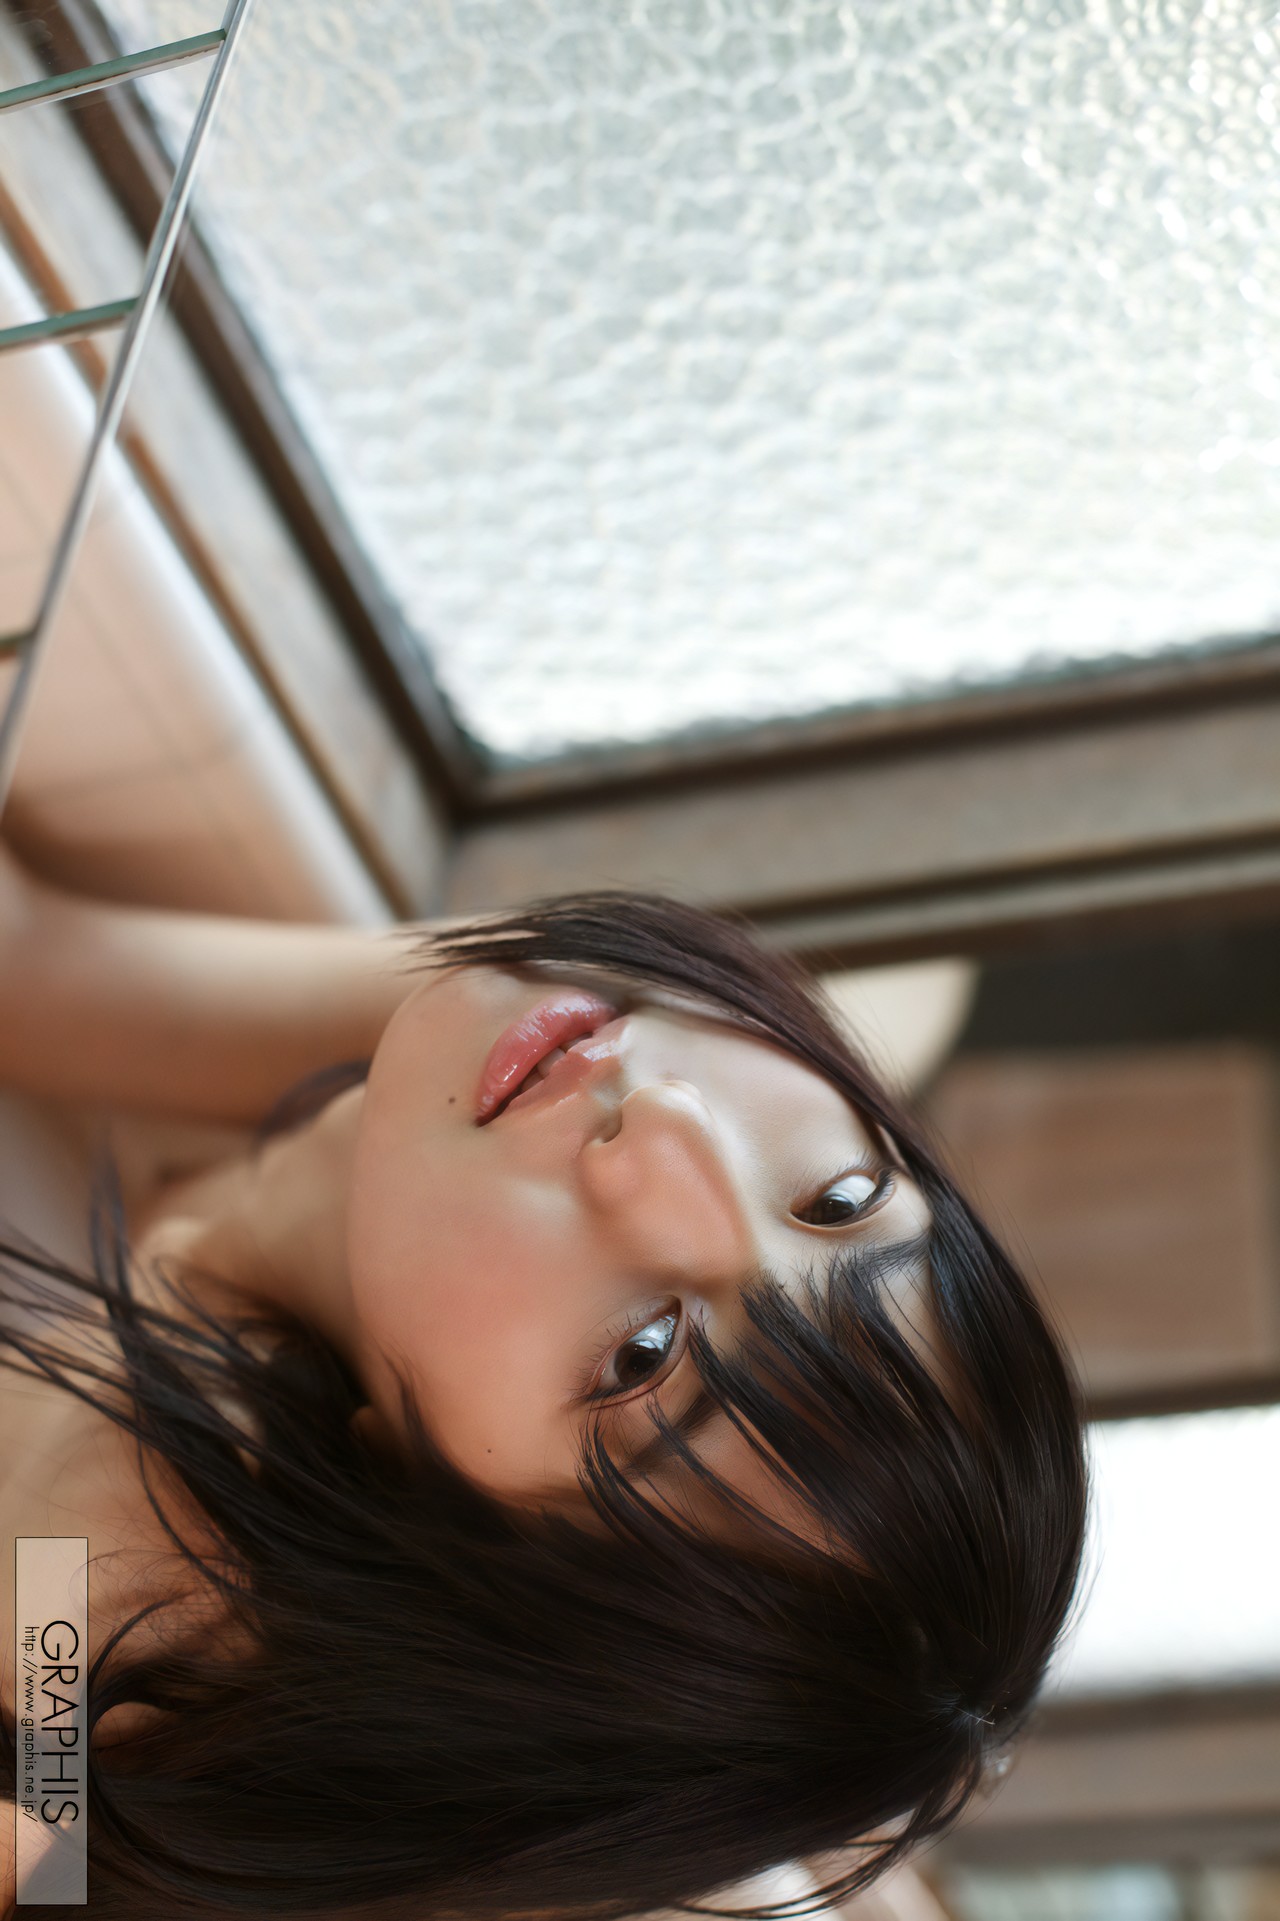 Kana Yume 由愛可奈, Graphis Special Contents [Further Growth] Vol.02